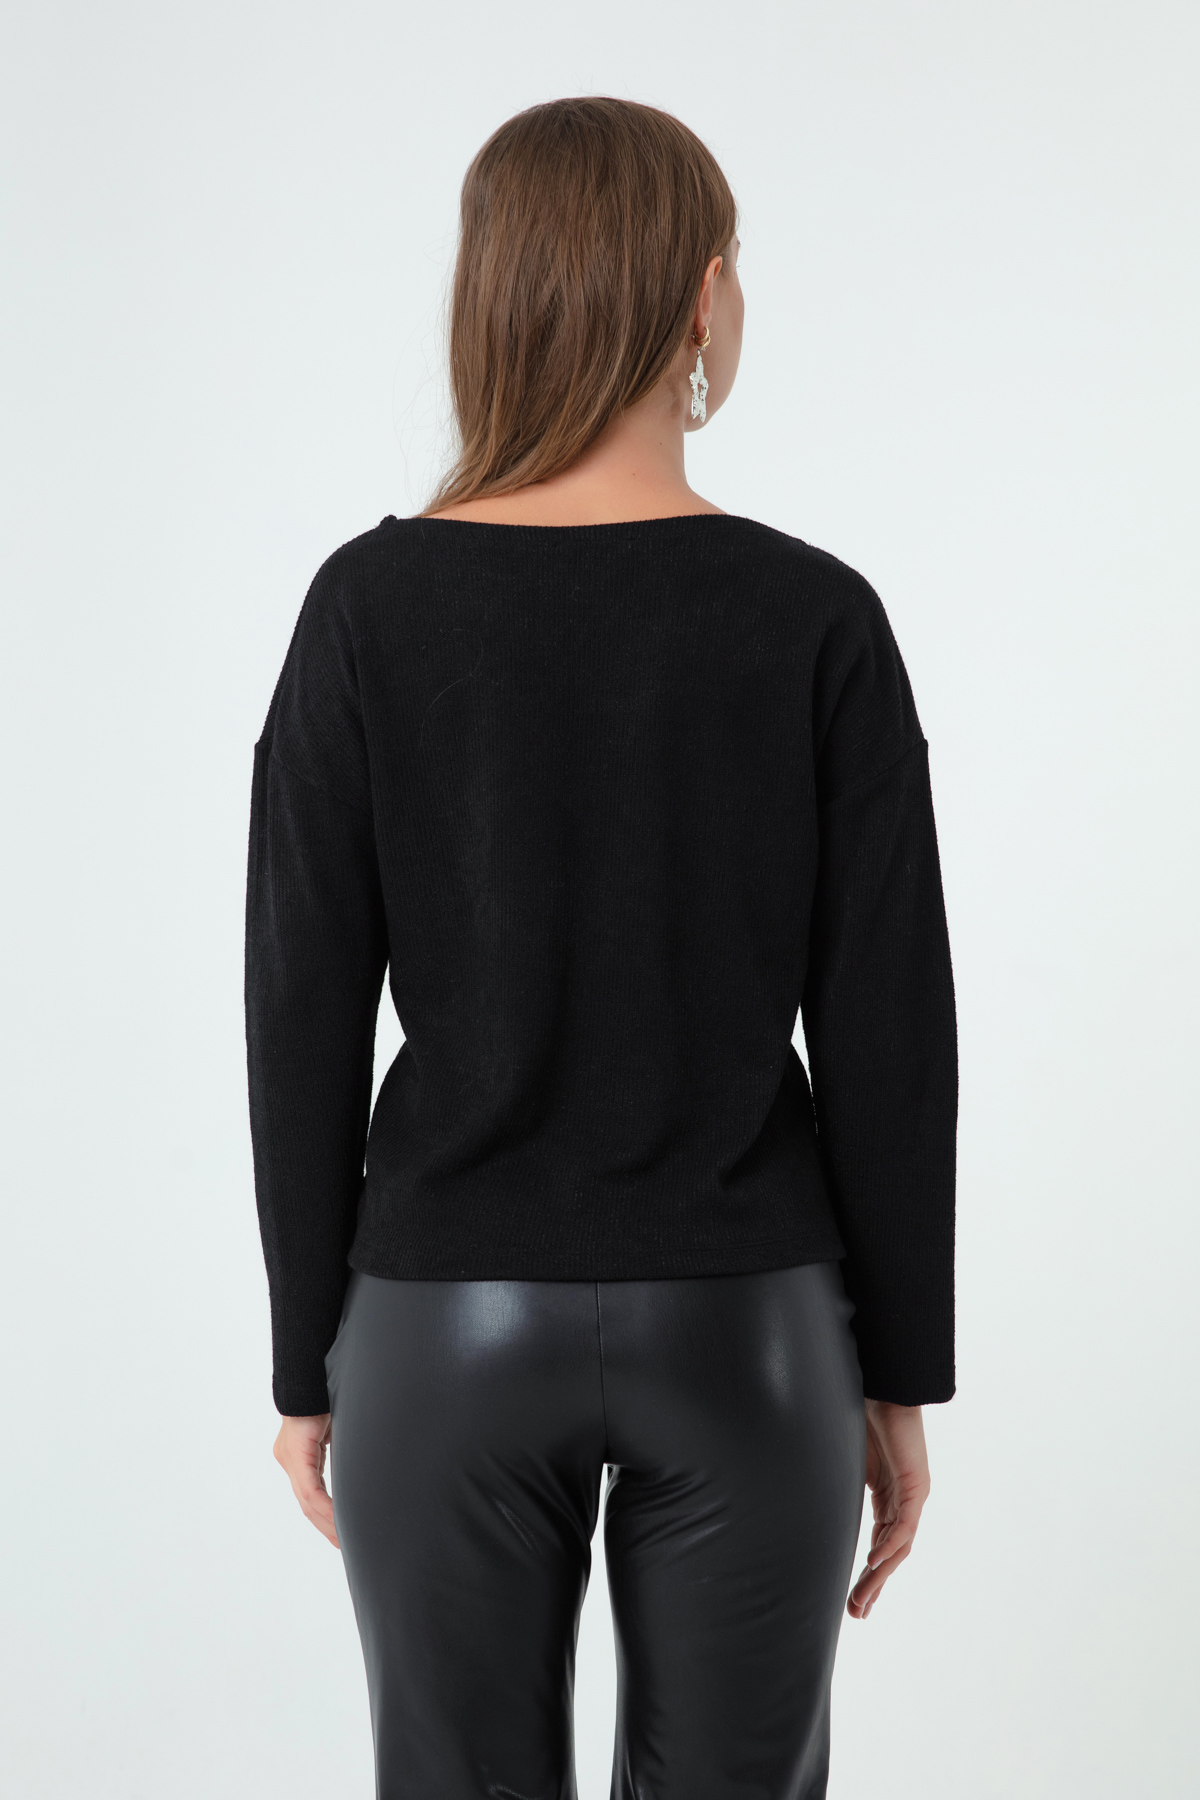 Women's Black Accessory Detailed Knitted Sweater